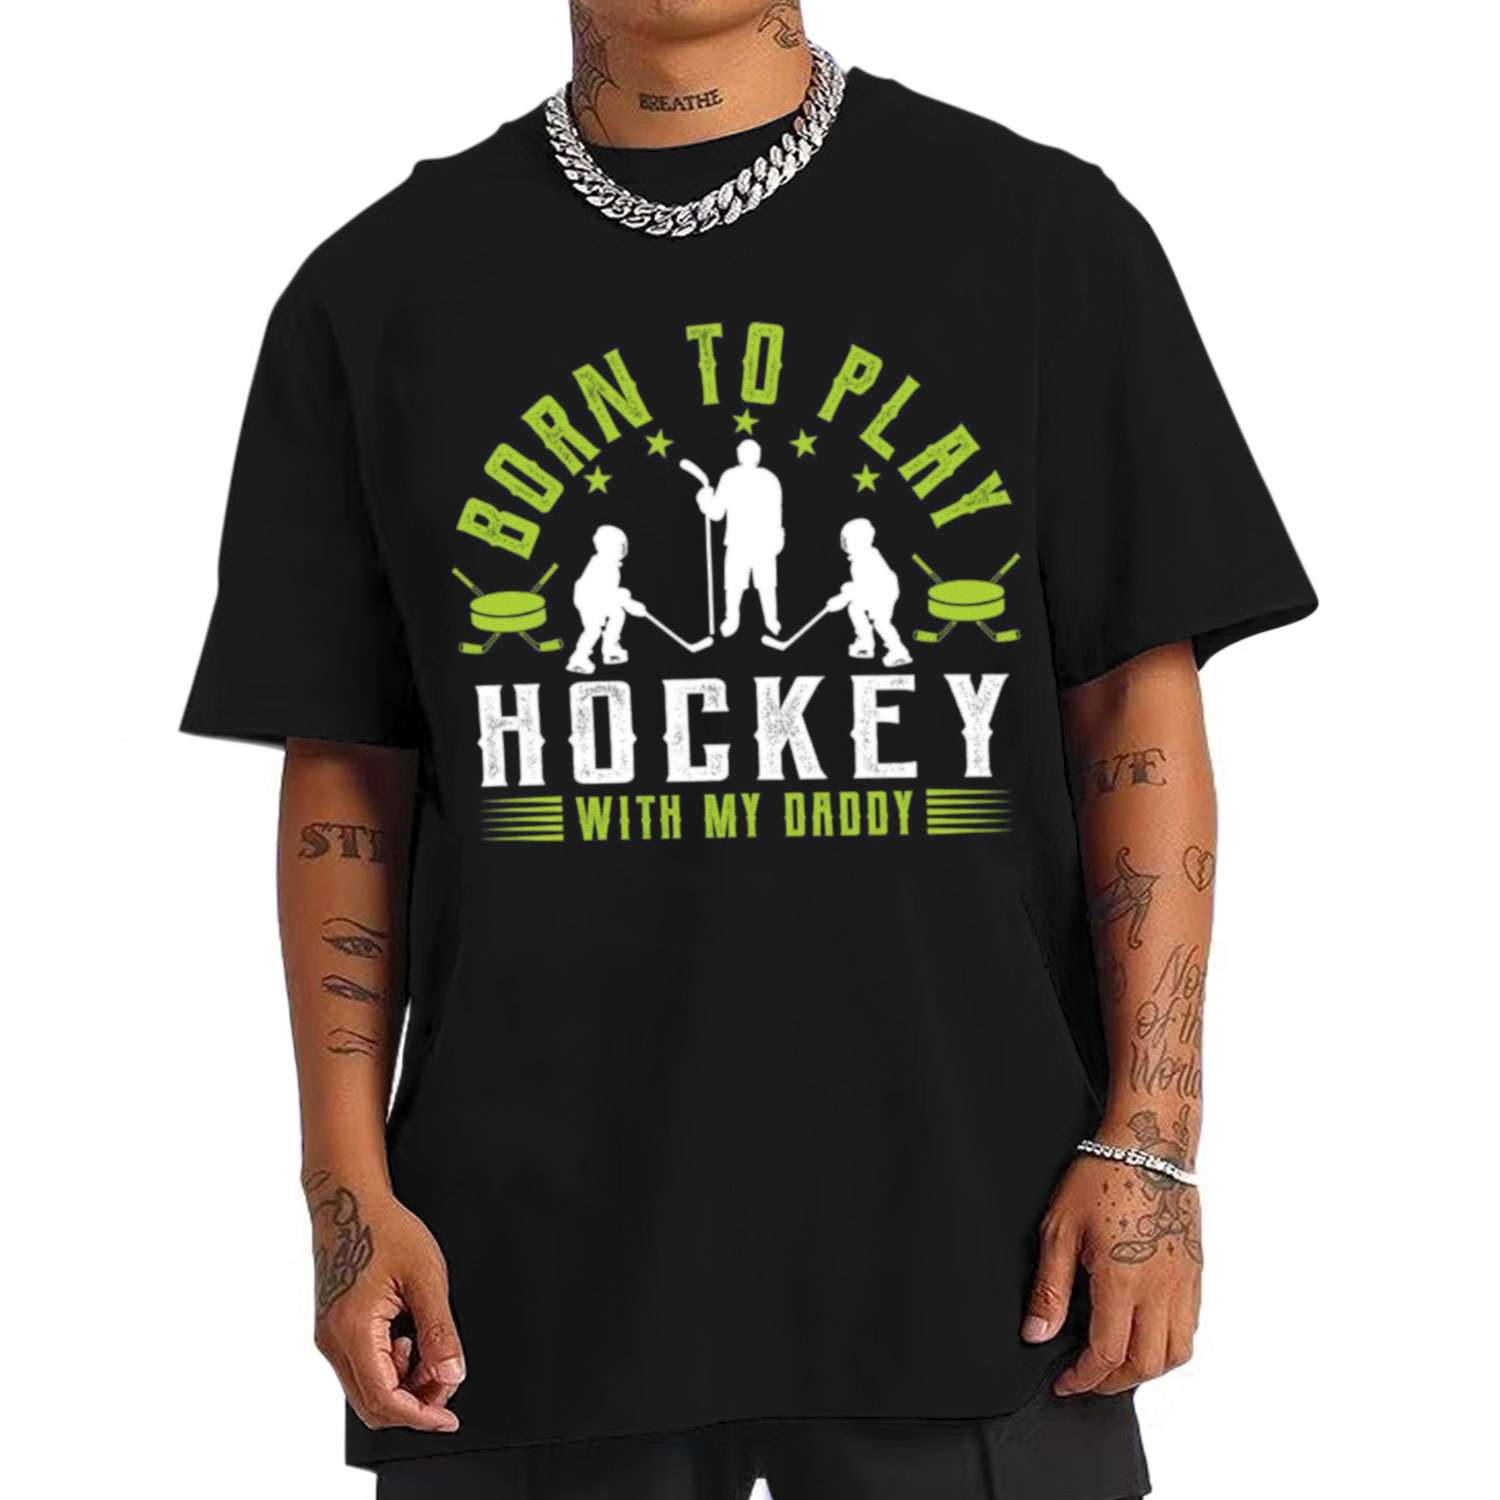 Born To Play Hockey With My Daddy T-shirt